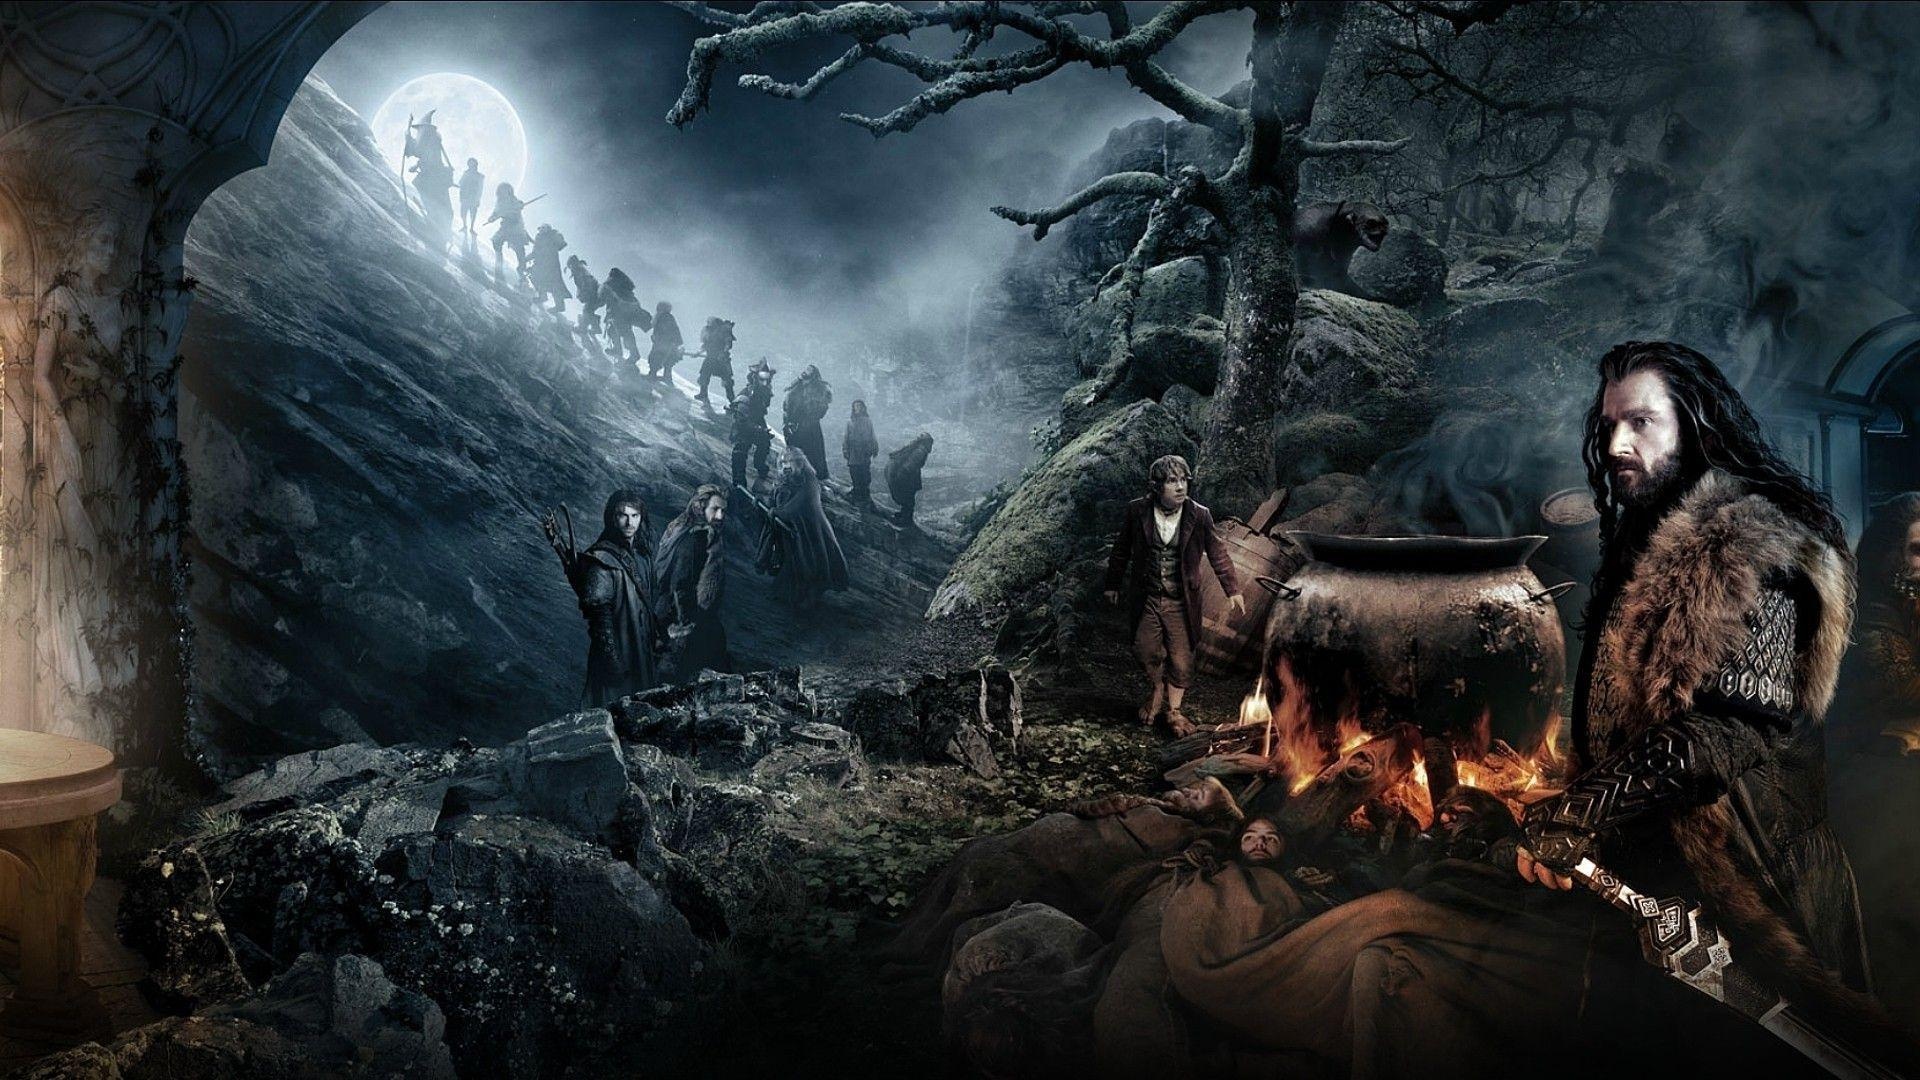 An Unexpected Journey, Top free wallpapers, Hobbit backgrounds, Middle-earth beauty, 1920x1080 Full HD Desktop